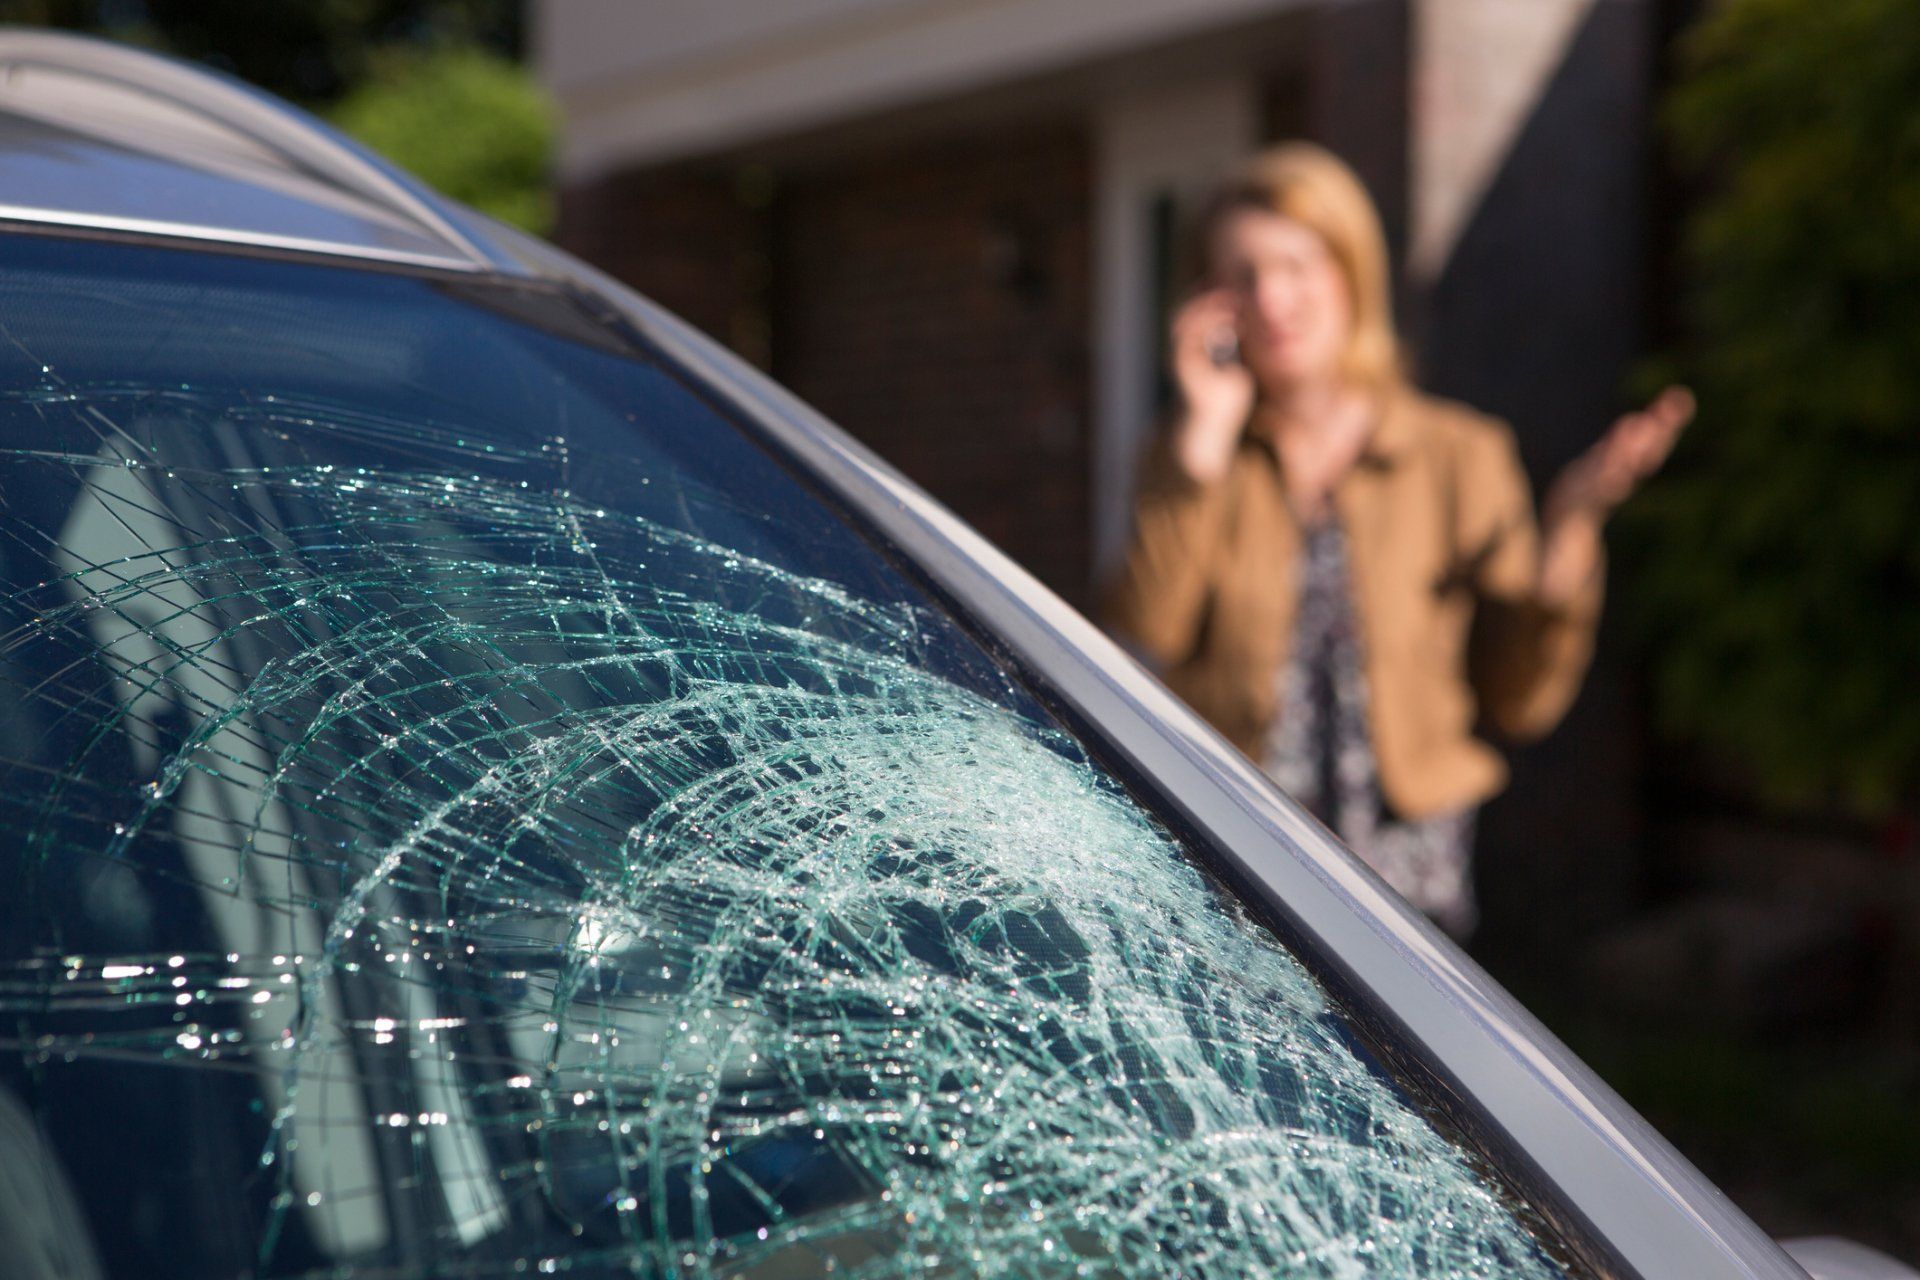 Windshield Crack — Woman Phoning For Help After Car Windshield Has Broken in Rancho Cordova, CA